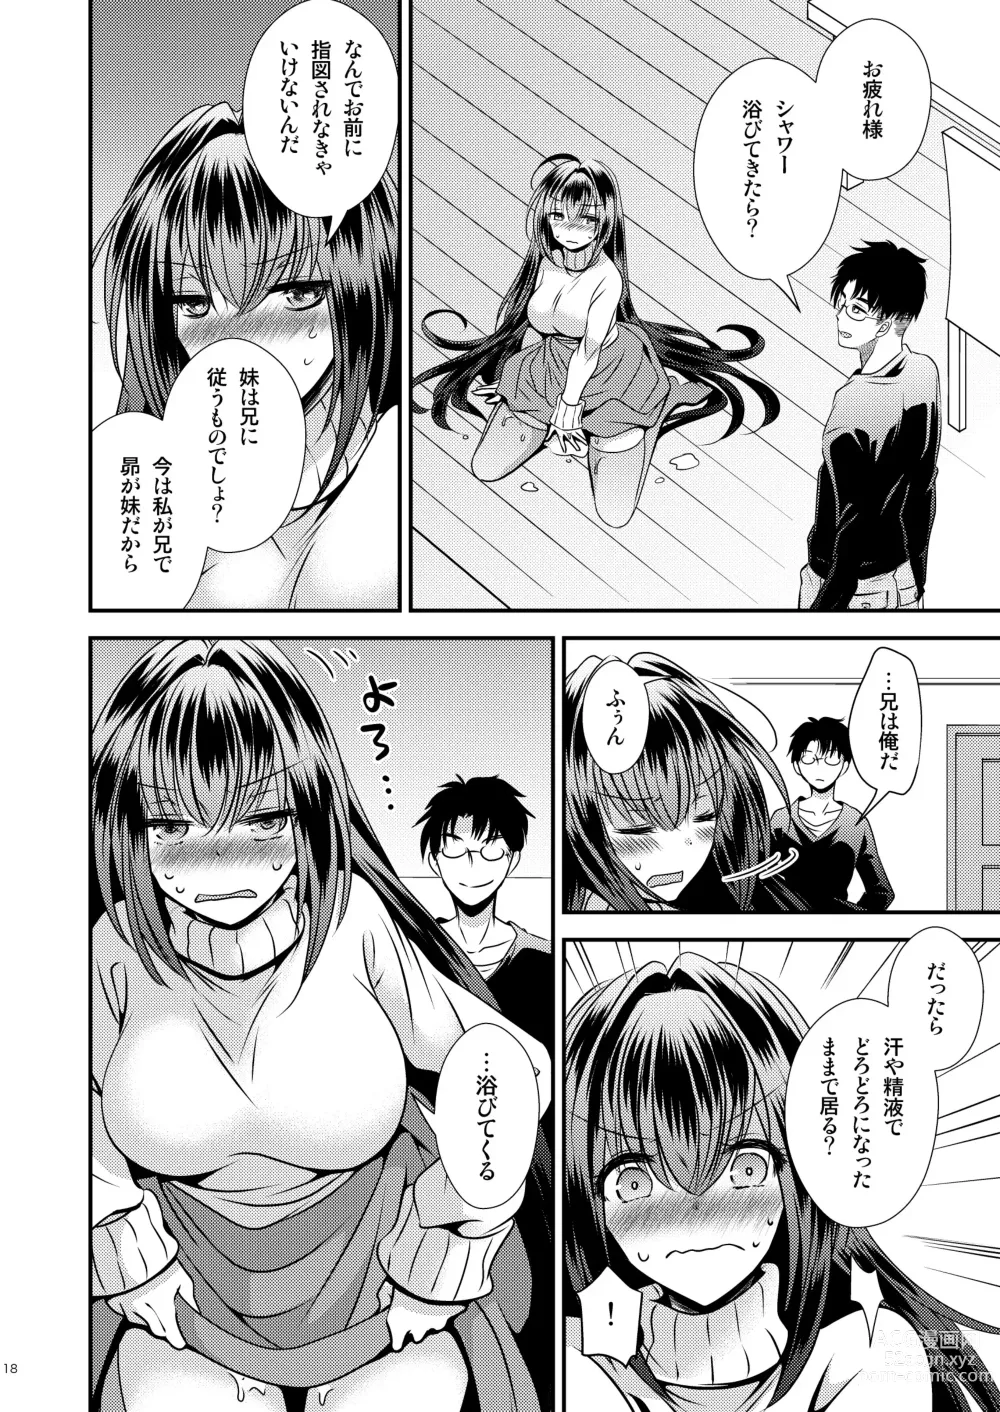 Page 18 of doujinshi 性欲処理に使っていた妹と入れ替わった兄